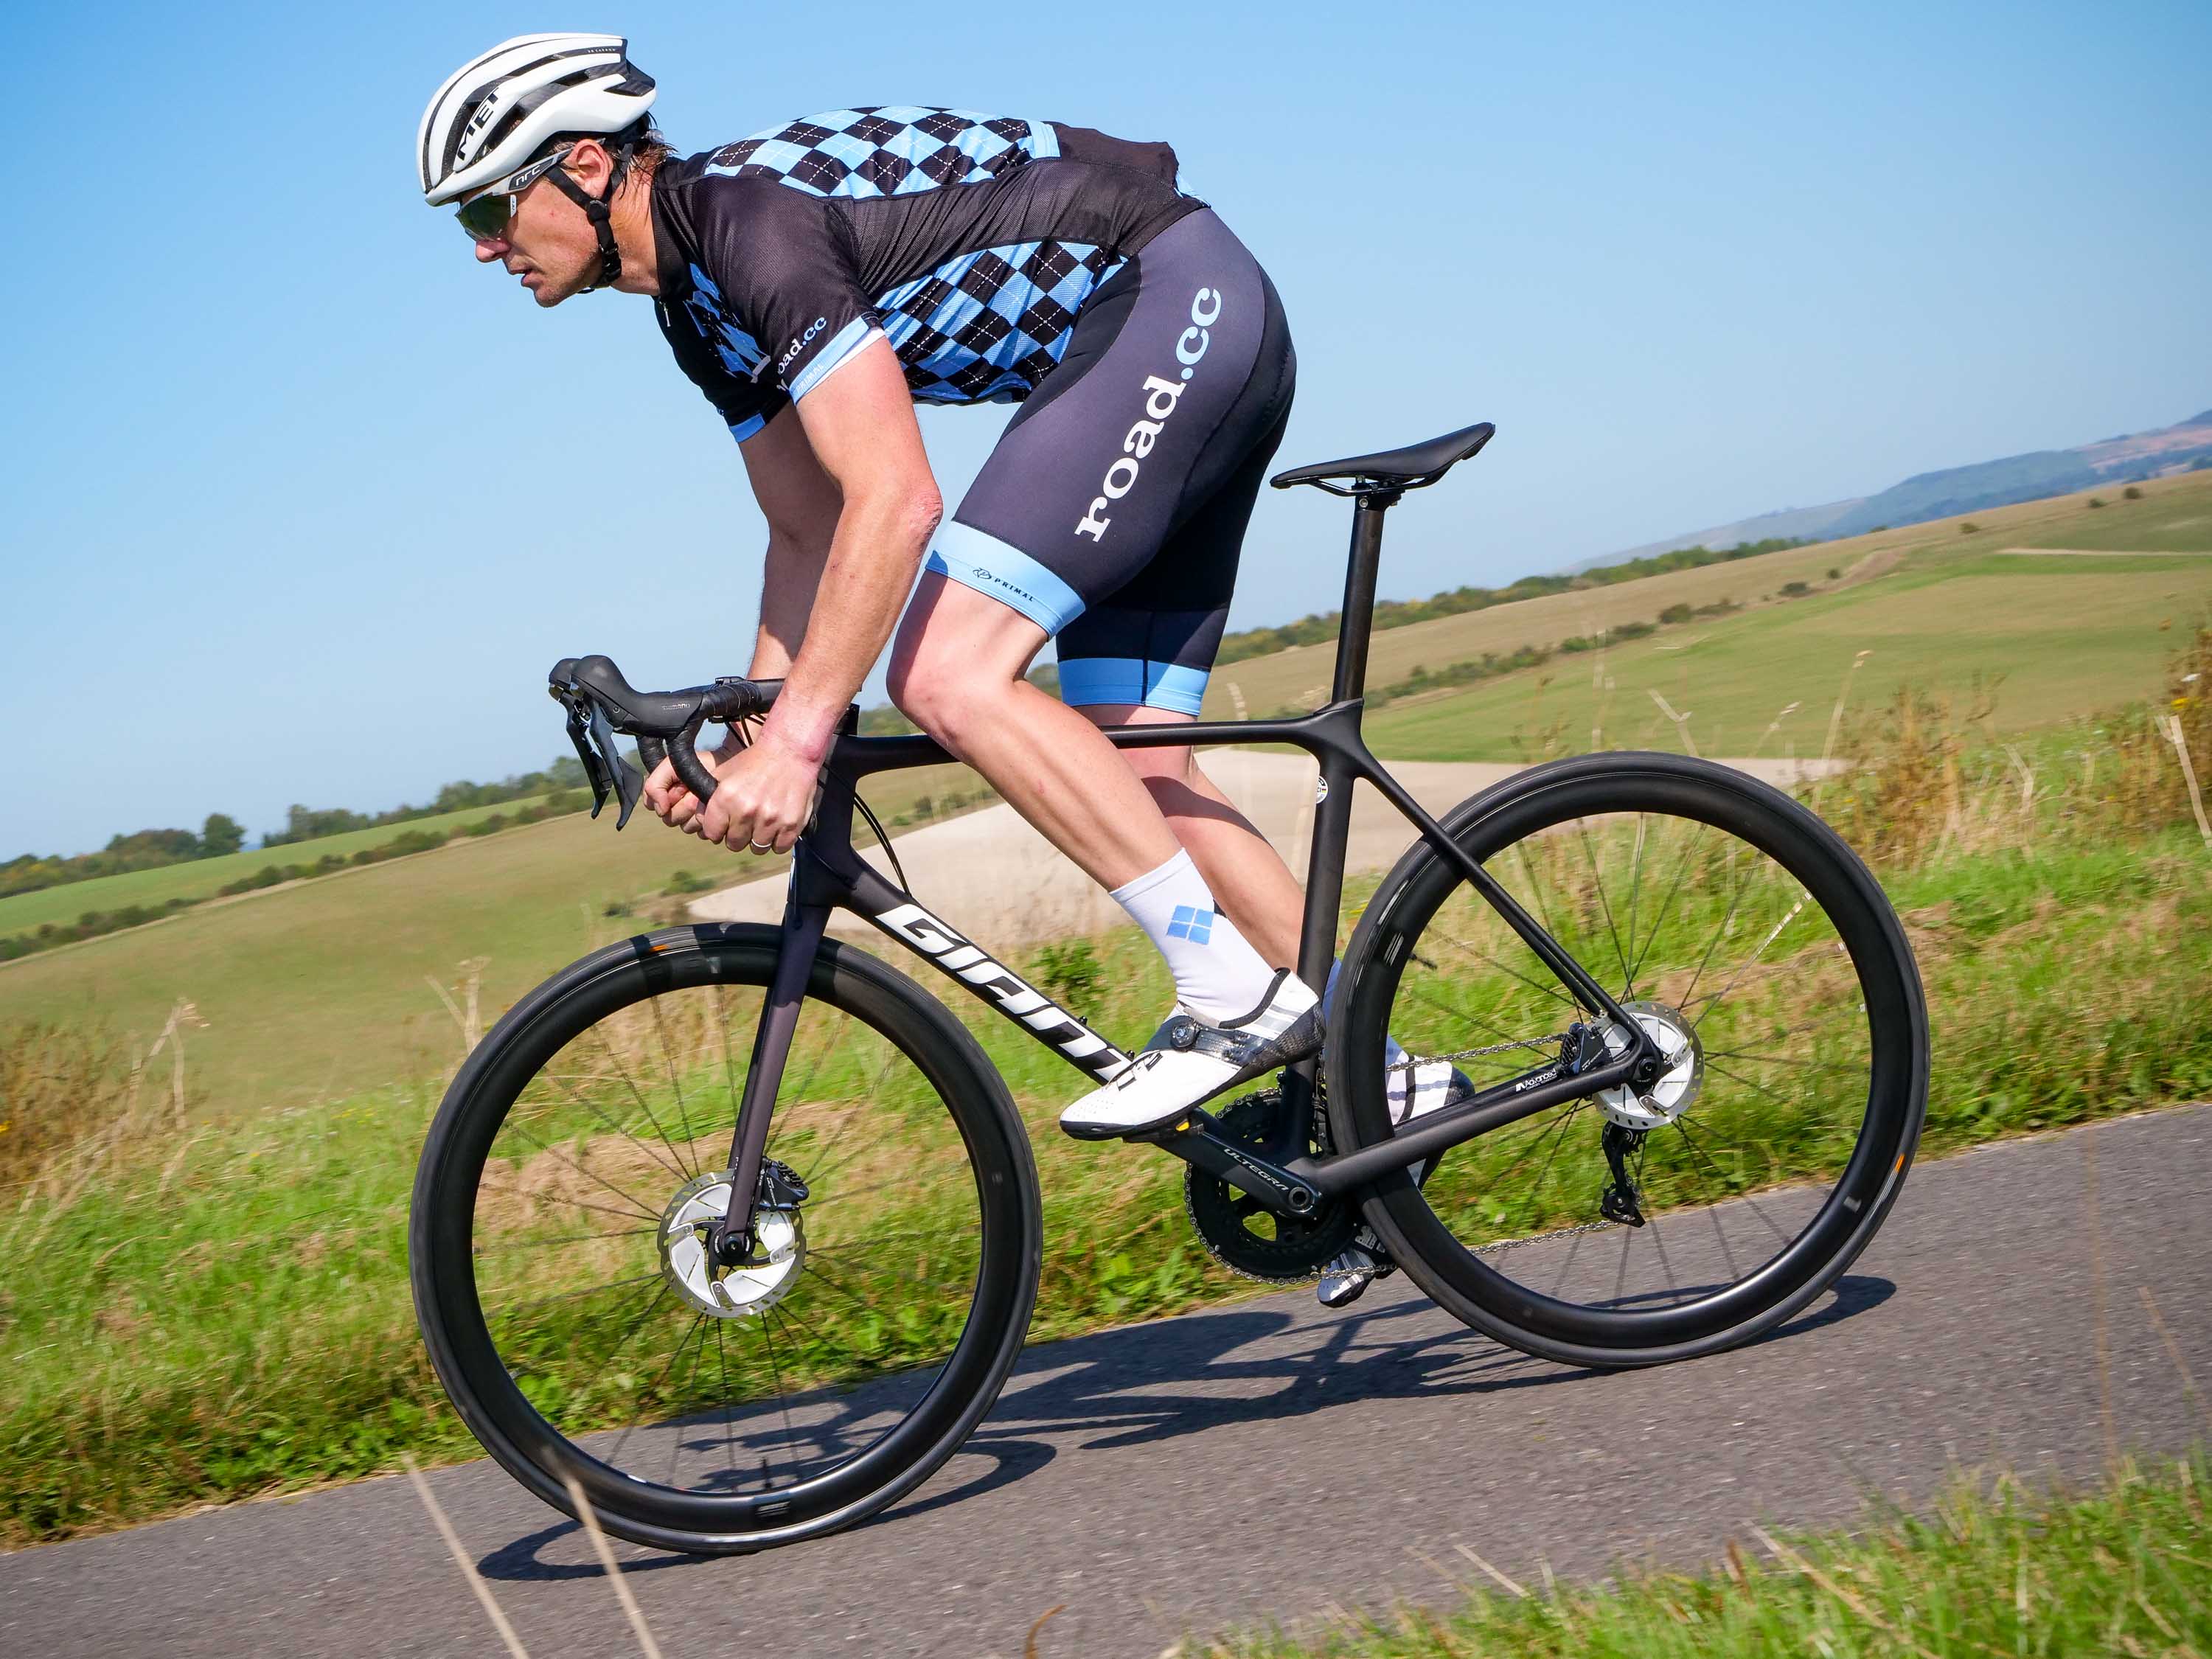 giant tcr advanced 1 disc 2021 review